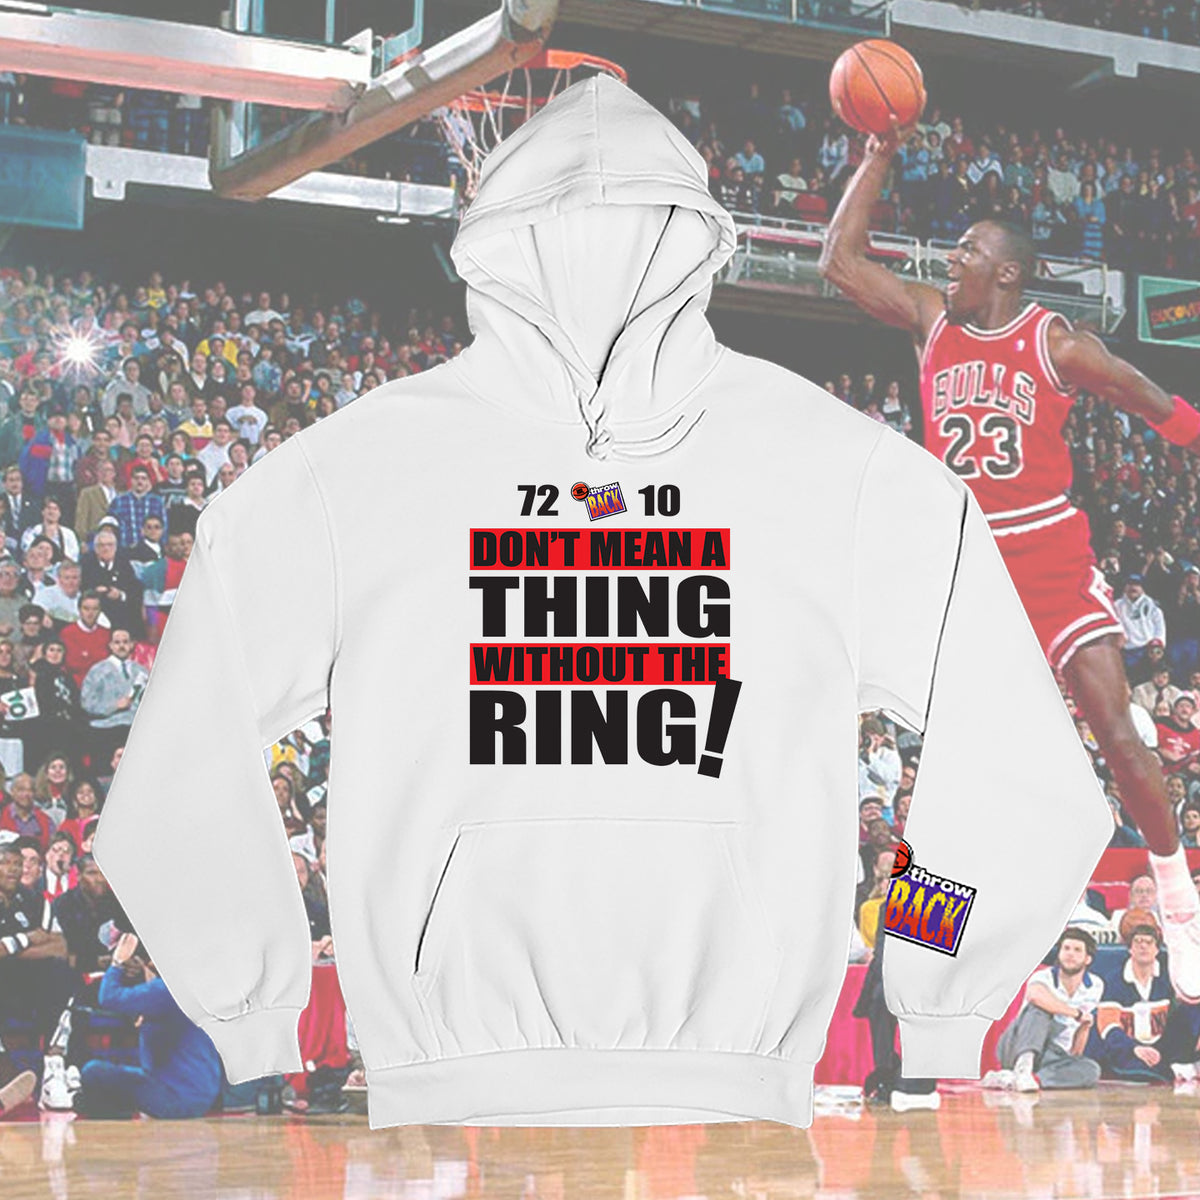 Bulls 72-10 don't mean a thing without the ring shirt, hoodie